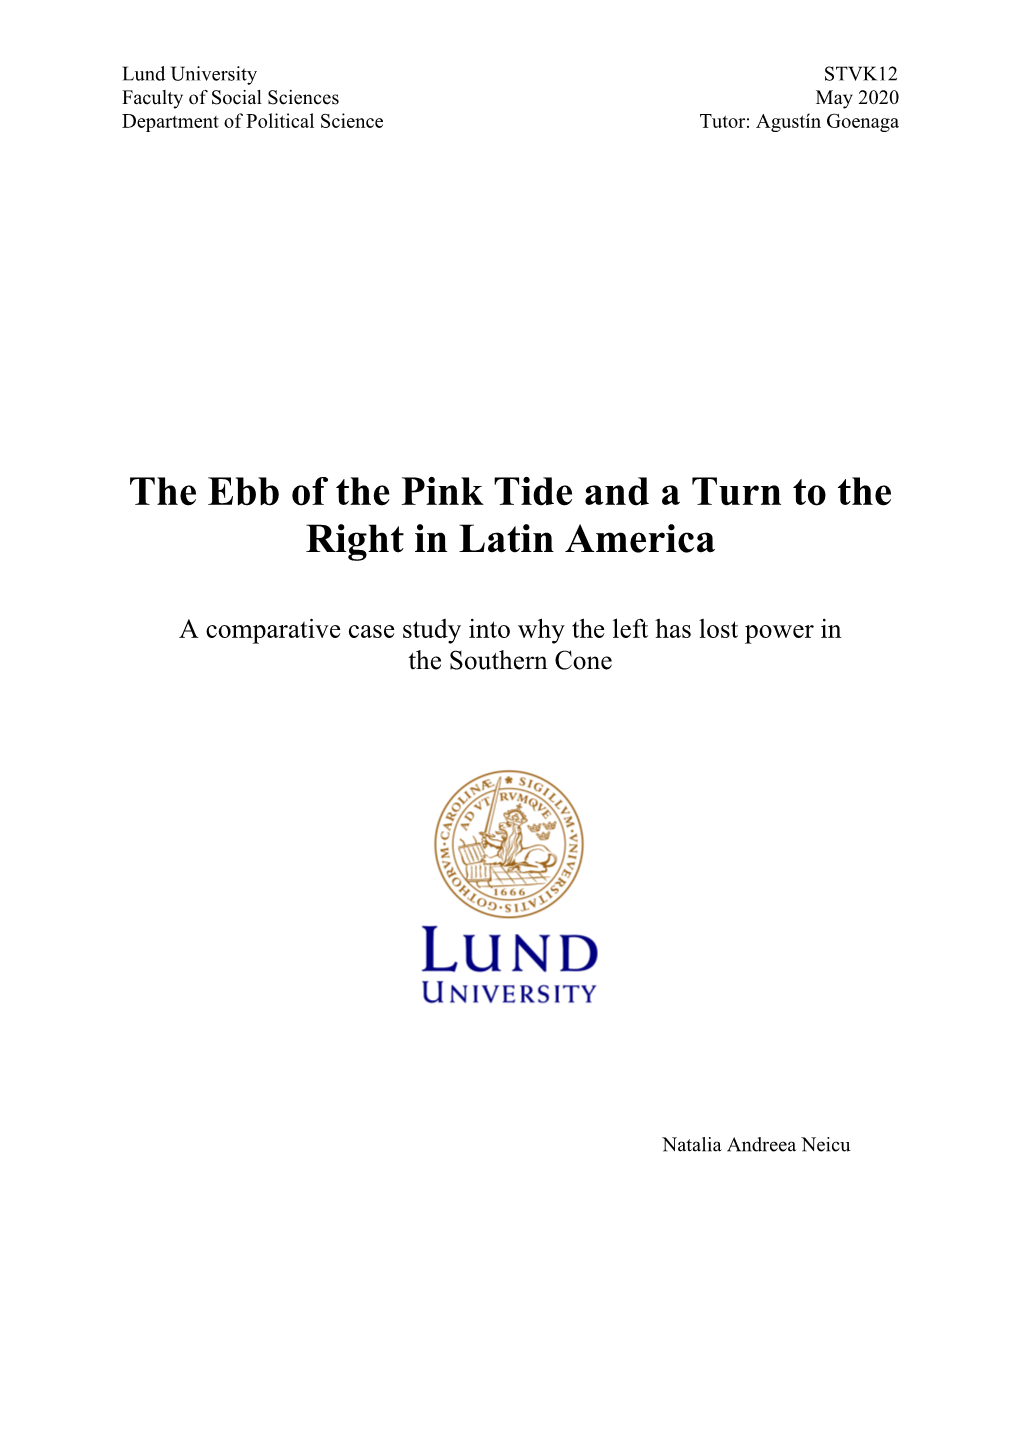 The Ebb of the Pink Tide and a Turn to the Right in Latin America